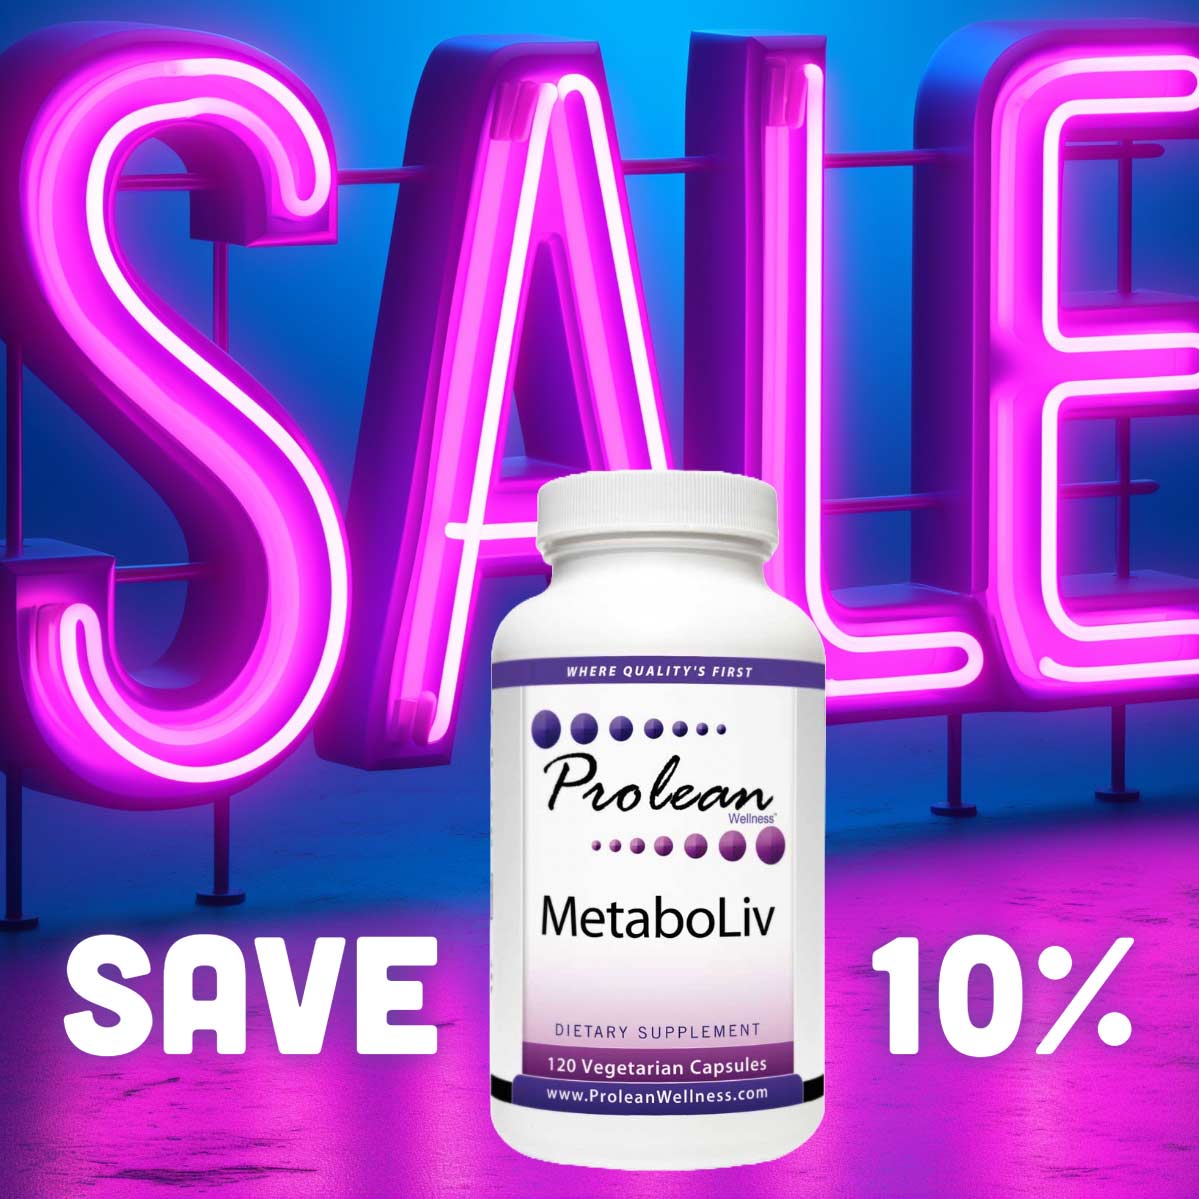 Save 10% in April on MetaboLiv Supplement from ProleanWellness.com